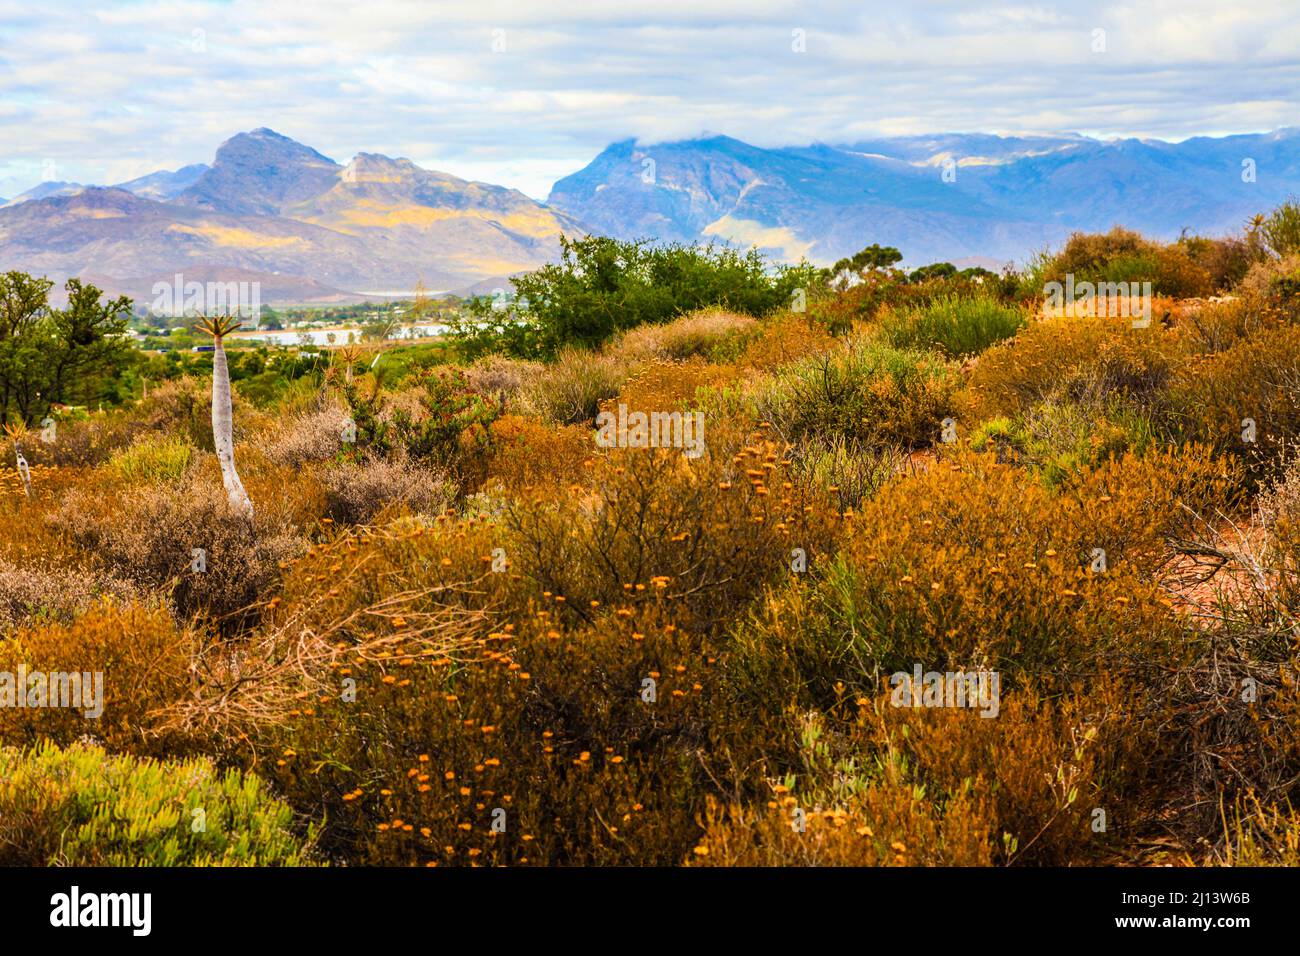 Karoo Desert National Botanical Gardens featuring Succulents, Aloes and Quiver Trees Stock Photo